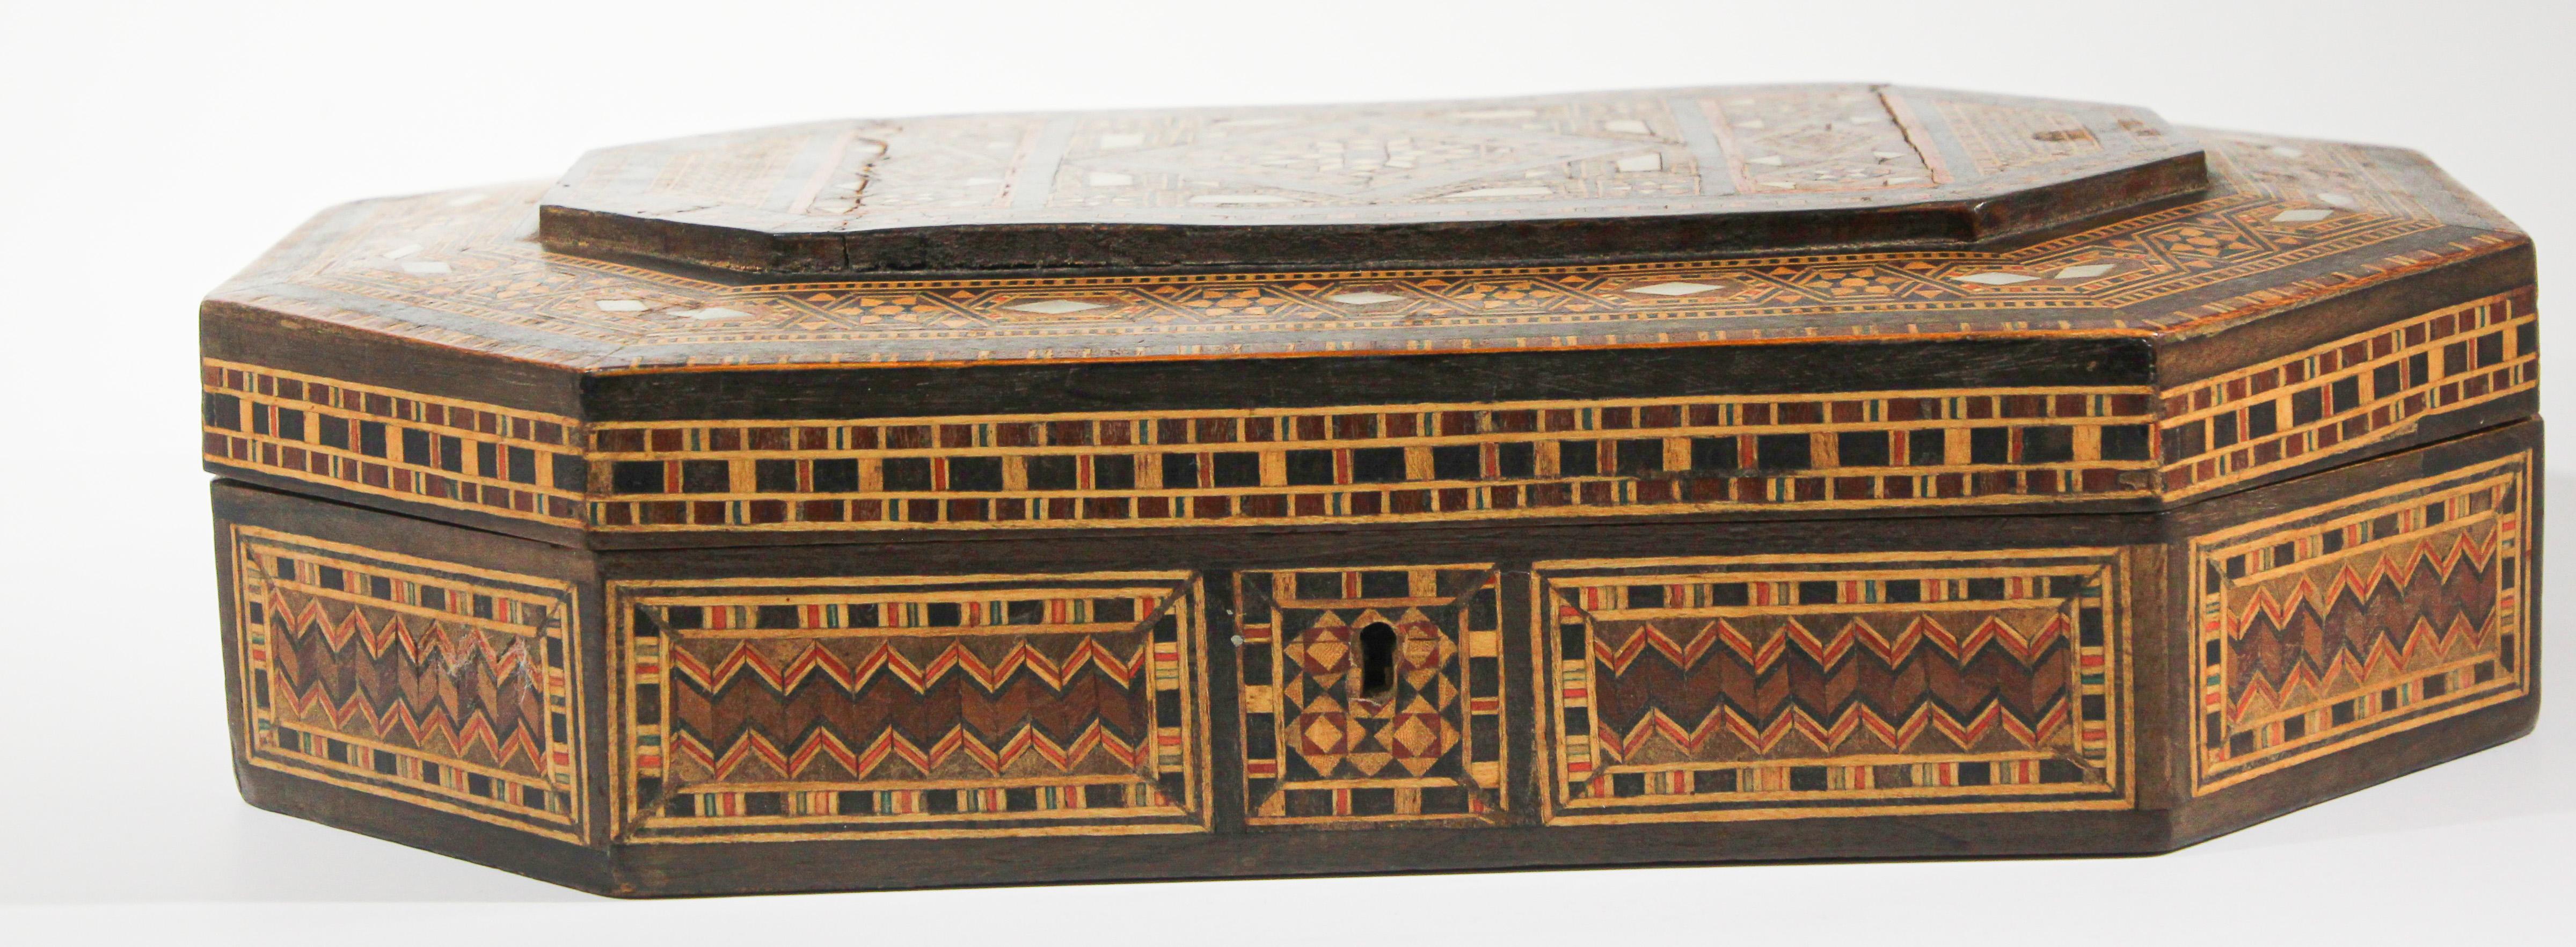 Large Antique Moorish Micro Mosaic Inlaid Jewelry Box Hexagonal Shape In Good Condition For Sale In North Hollywood, CA